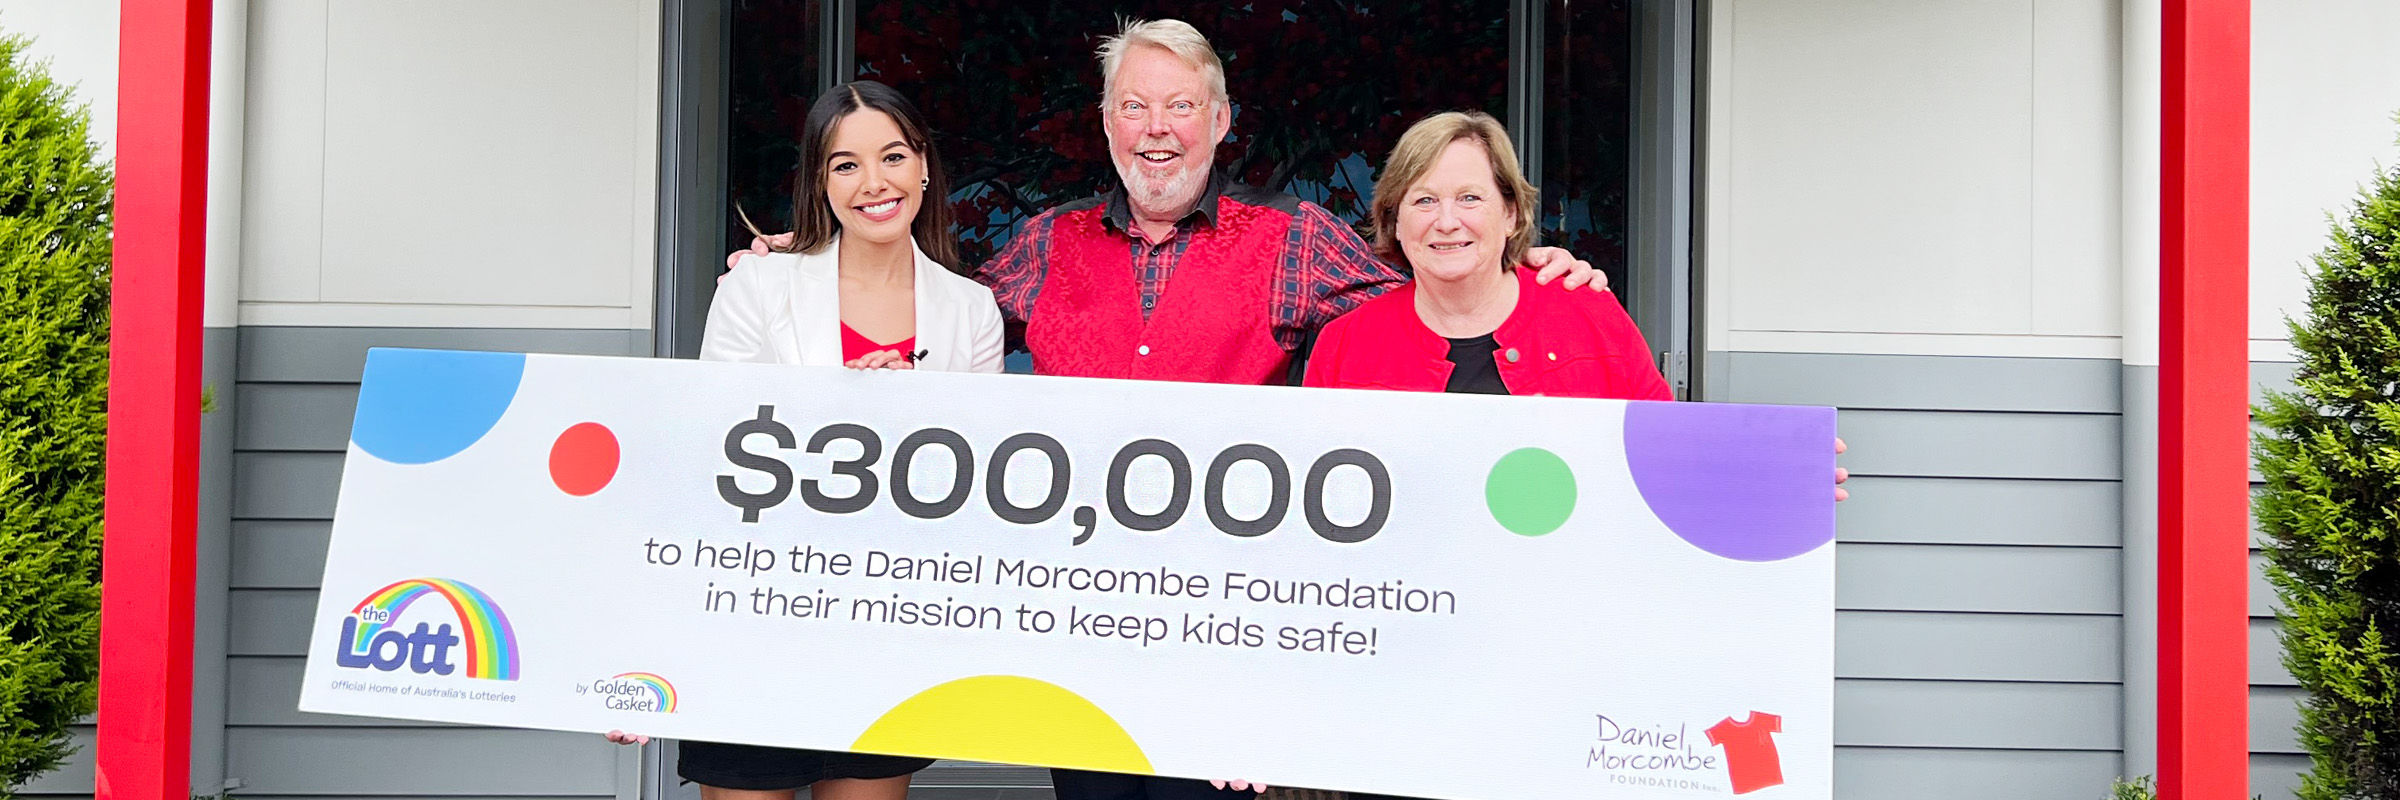 Keeping more kids safe from harm with $300,000 boost Hero Image